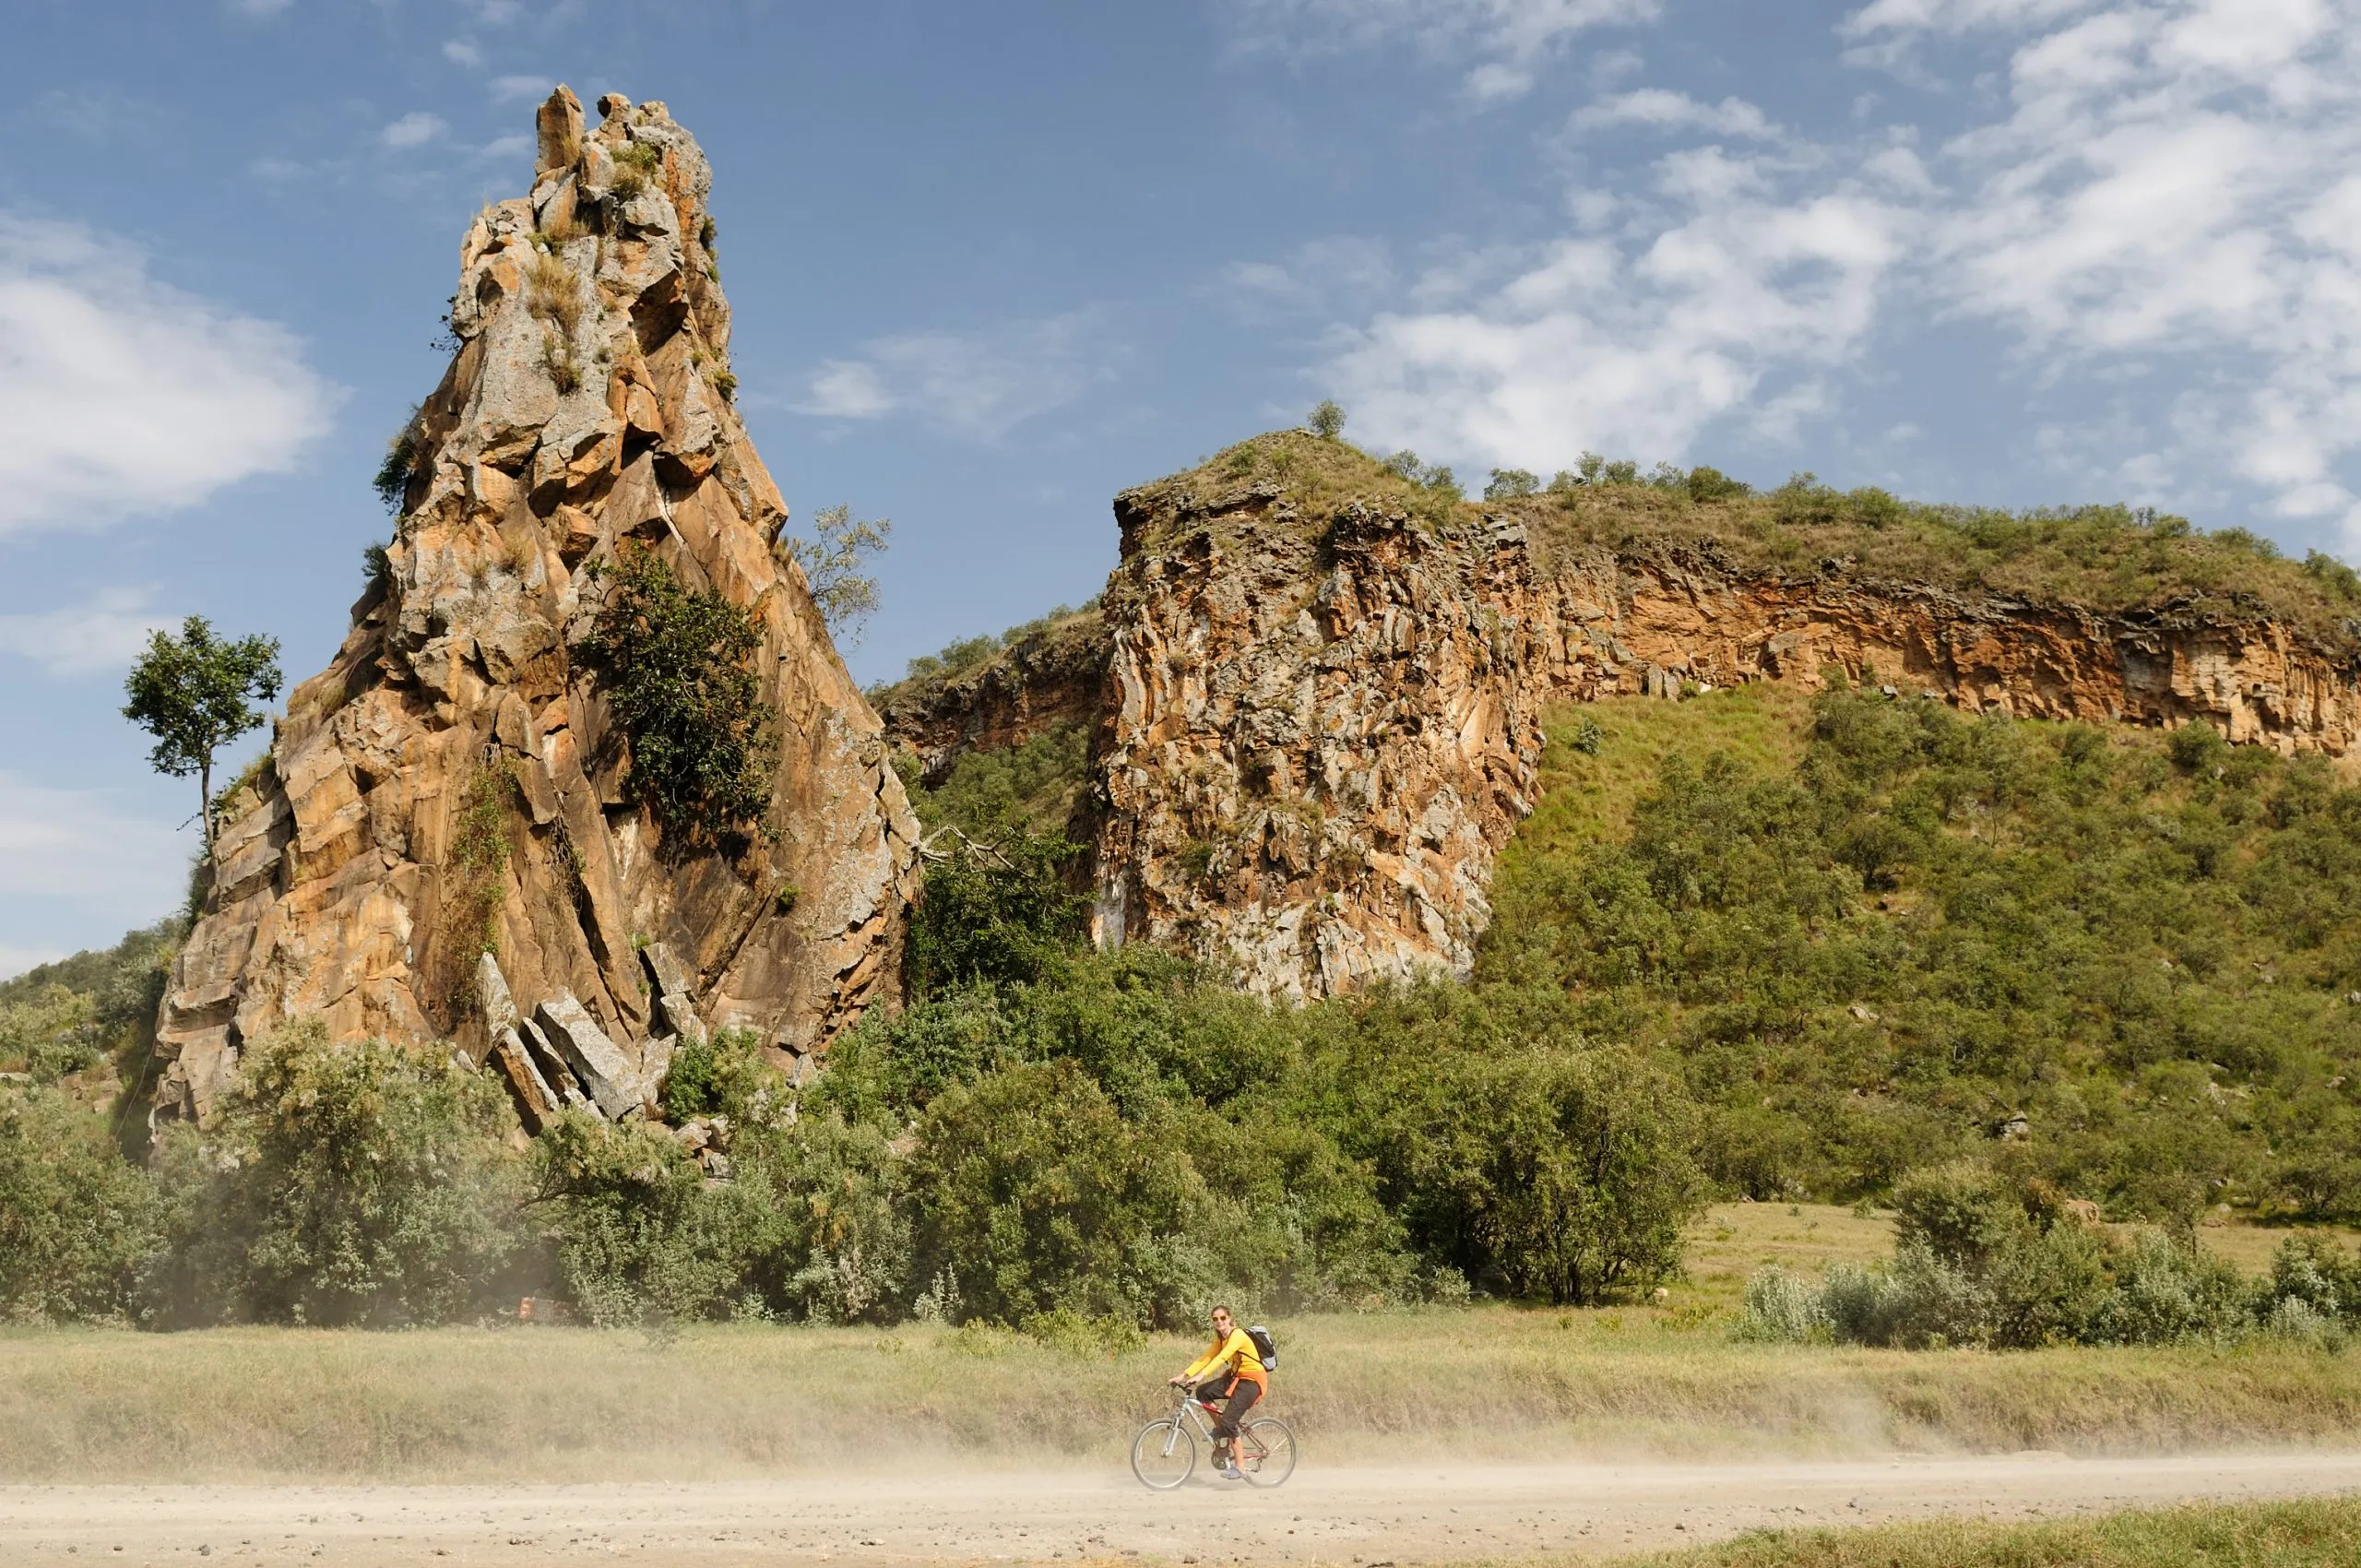 The tourist is cycling at the foot Stark rock towers in the Hells Gate National Park in Kenya